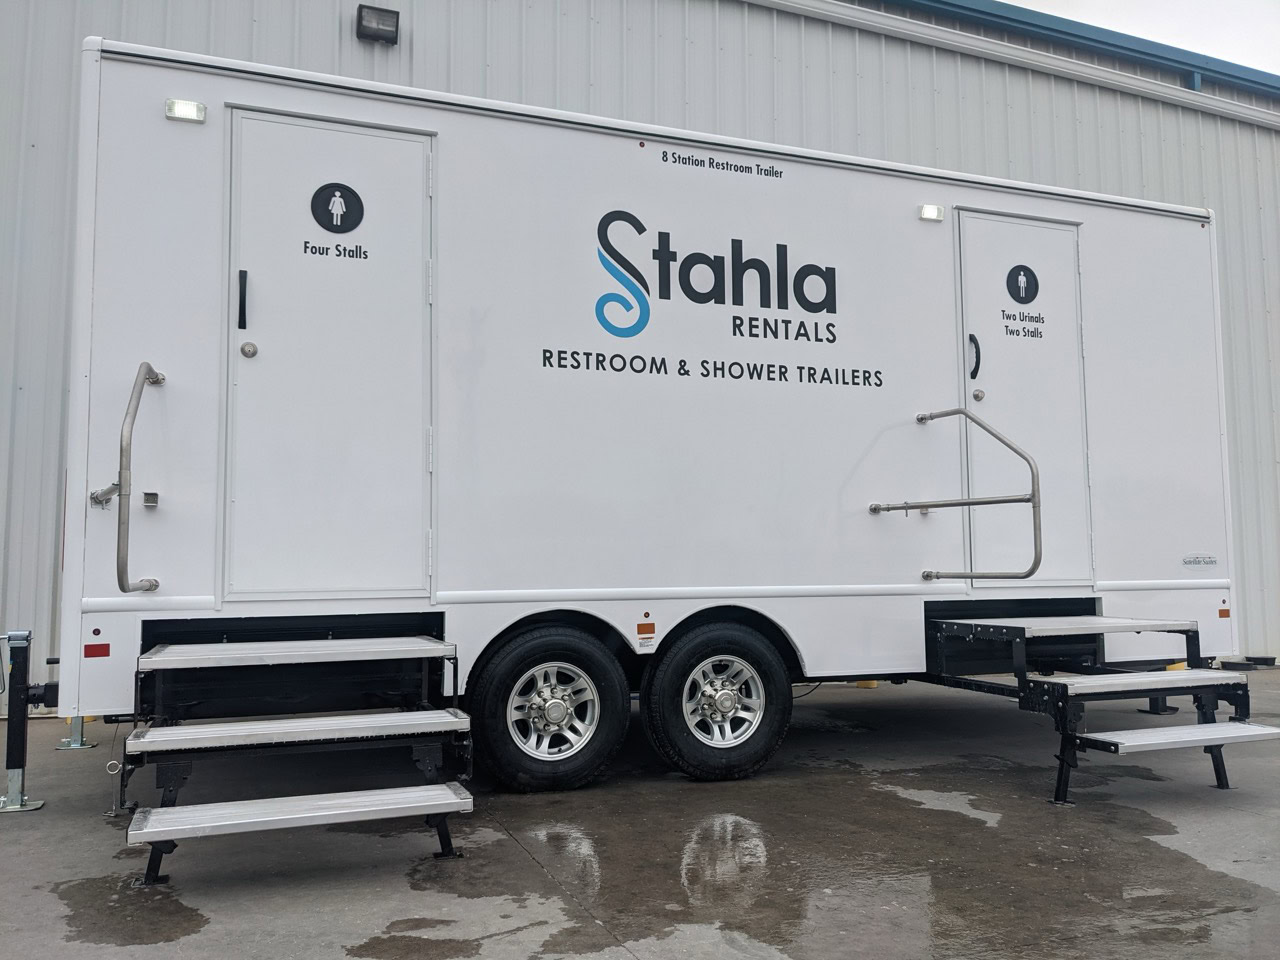 a white restroom and shower trailer with "stahla rentals" branding is parked outside. the 8 stall restroom trailer rental has two labeled doors: one for "four stalls" and another for "two stalls." two sets of stairs lead to the entrances.